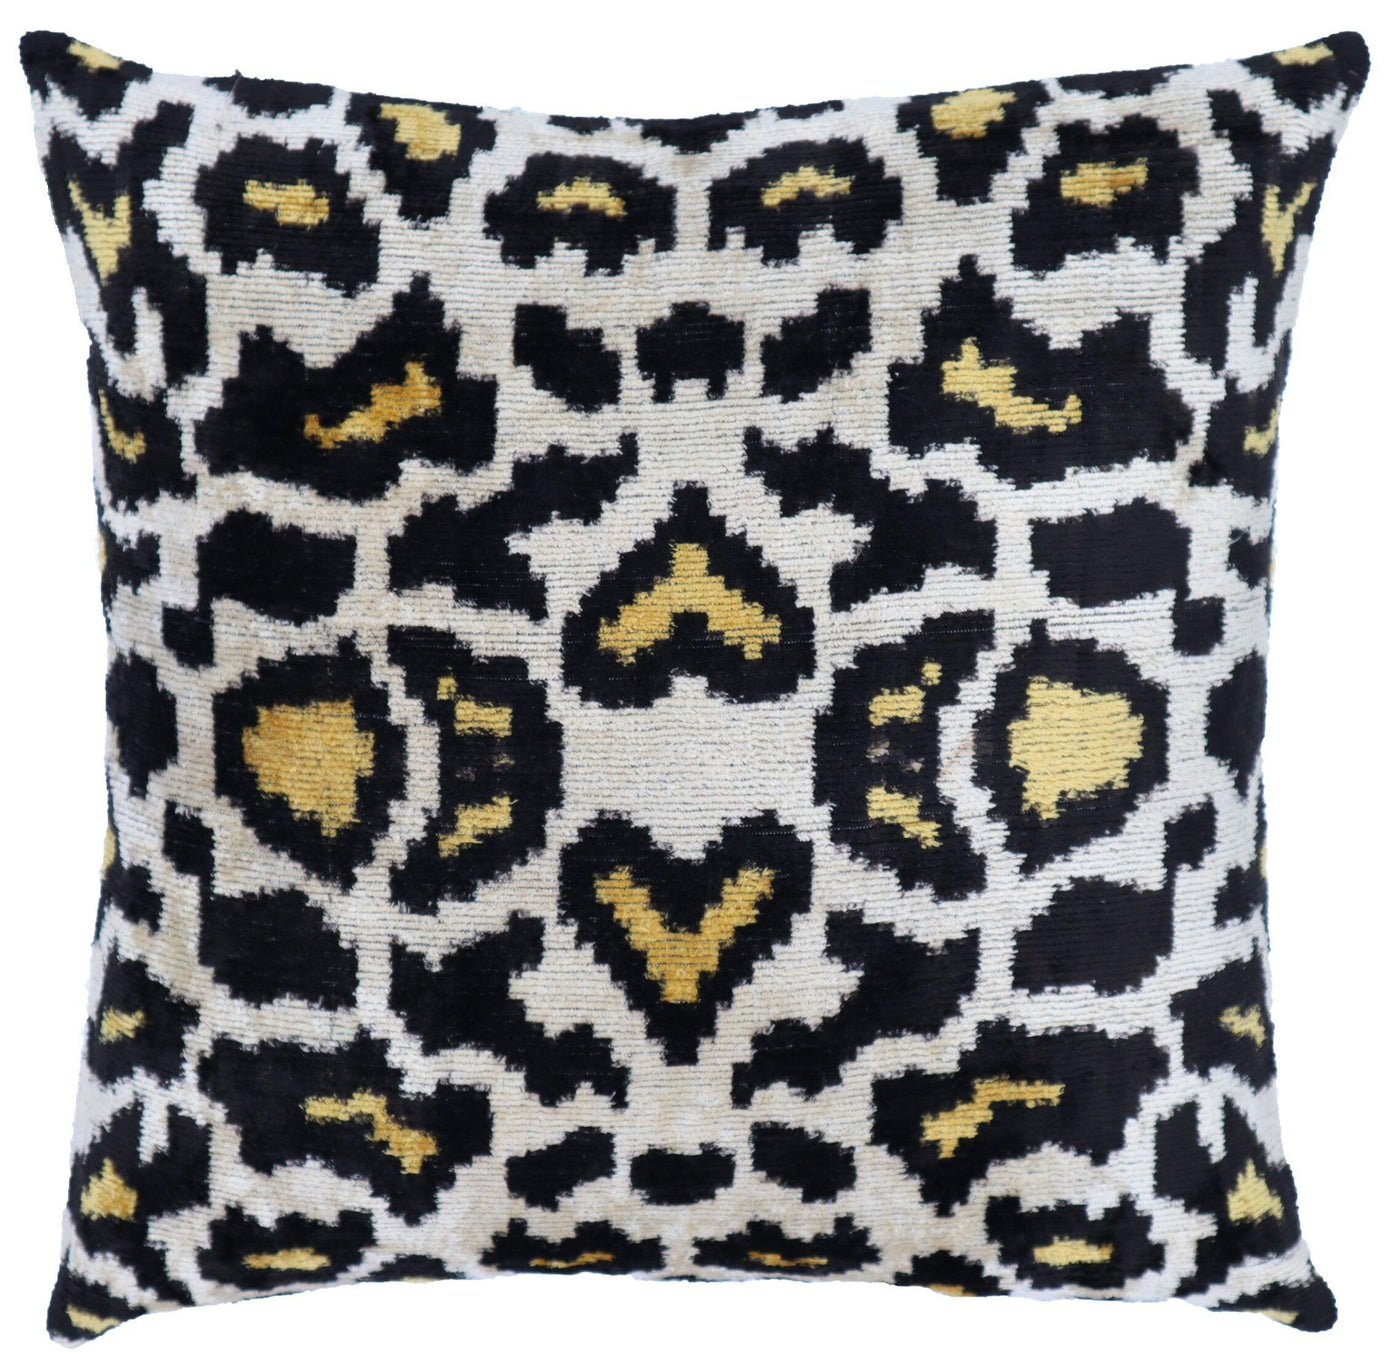 Canvello Tiger Print Black Pillows For Couch - 16x16 inch